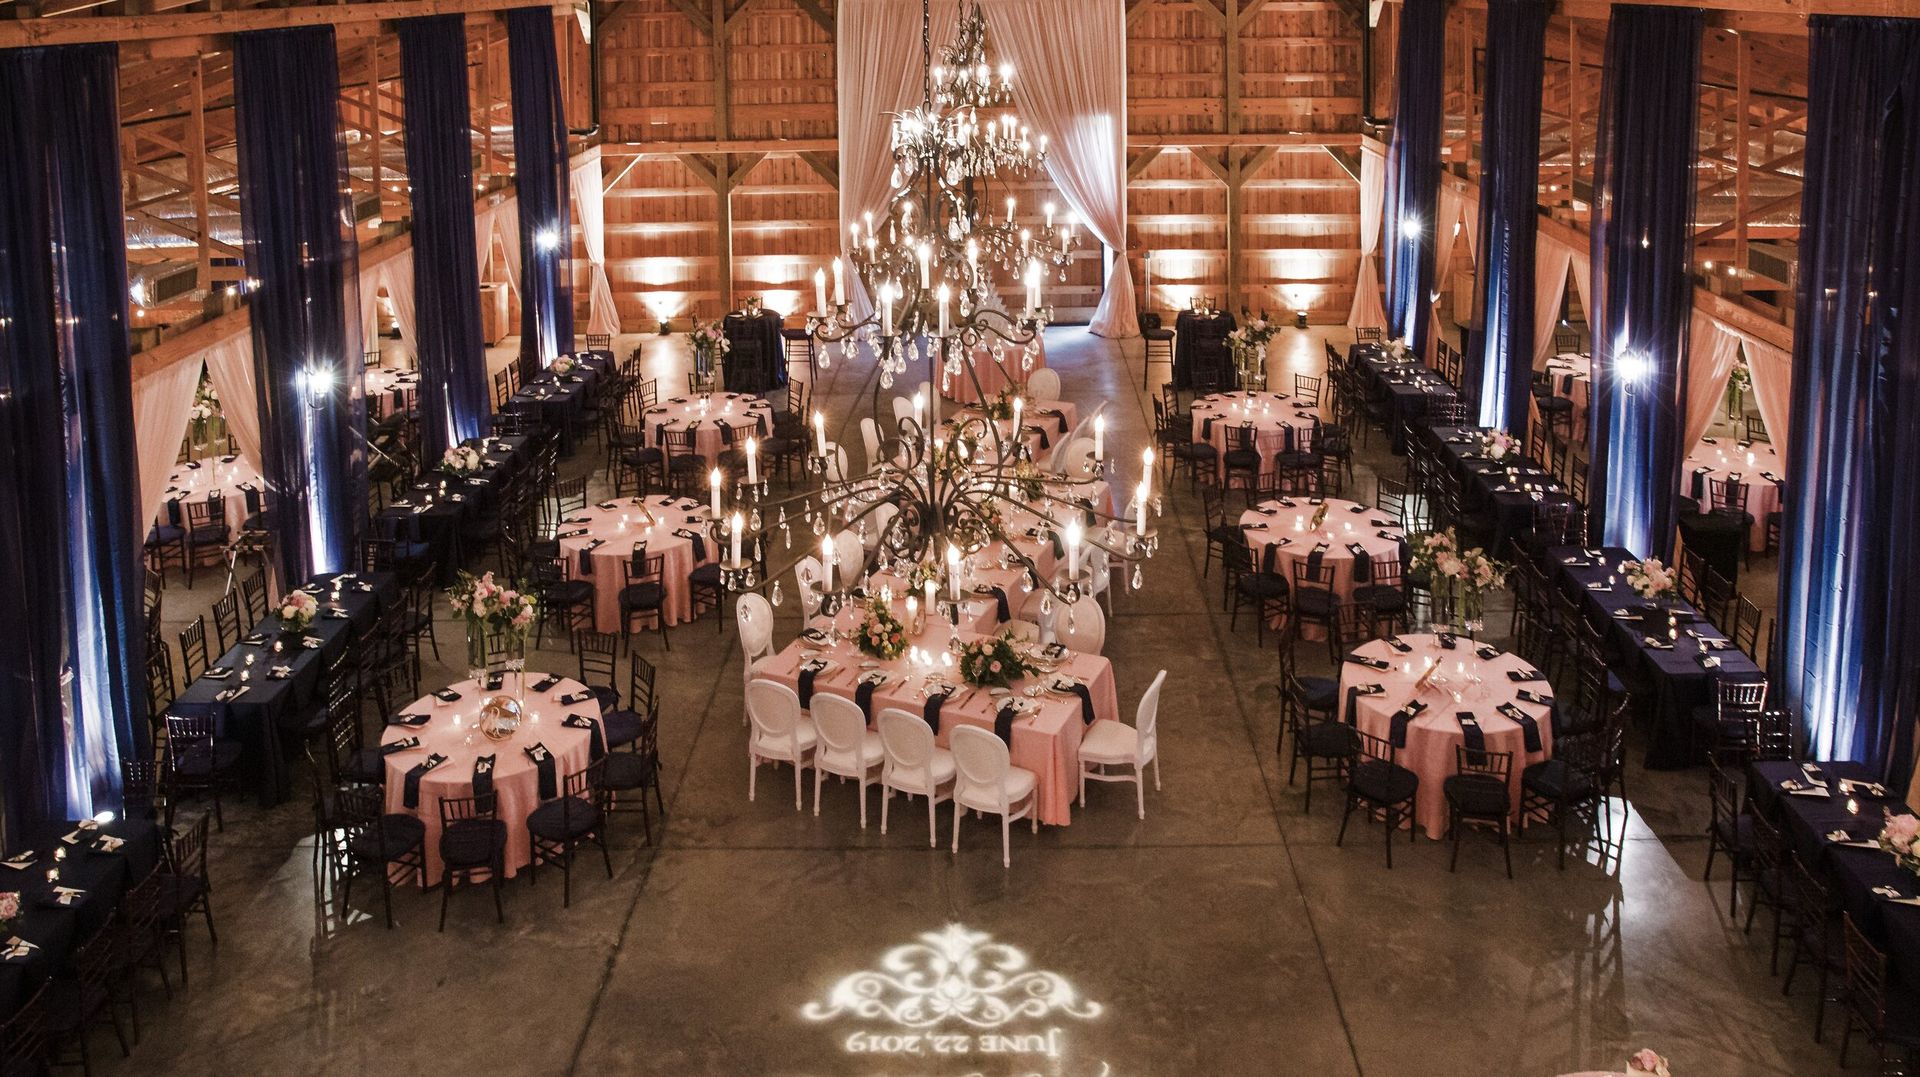 Rachel & Andrew's Wedding room filled with tables and chairs and a chandelier by Wedding Planner Nashville